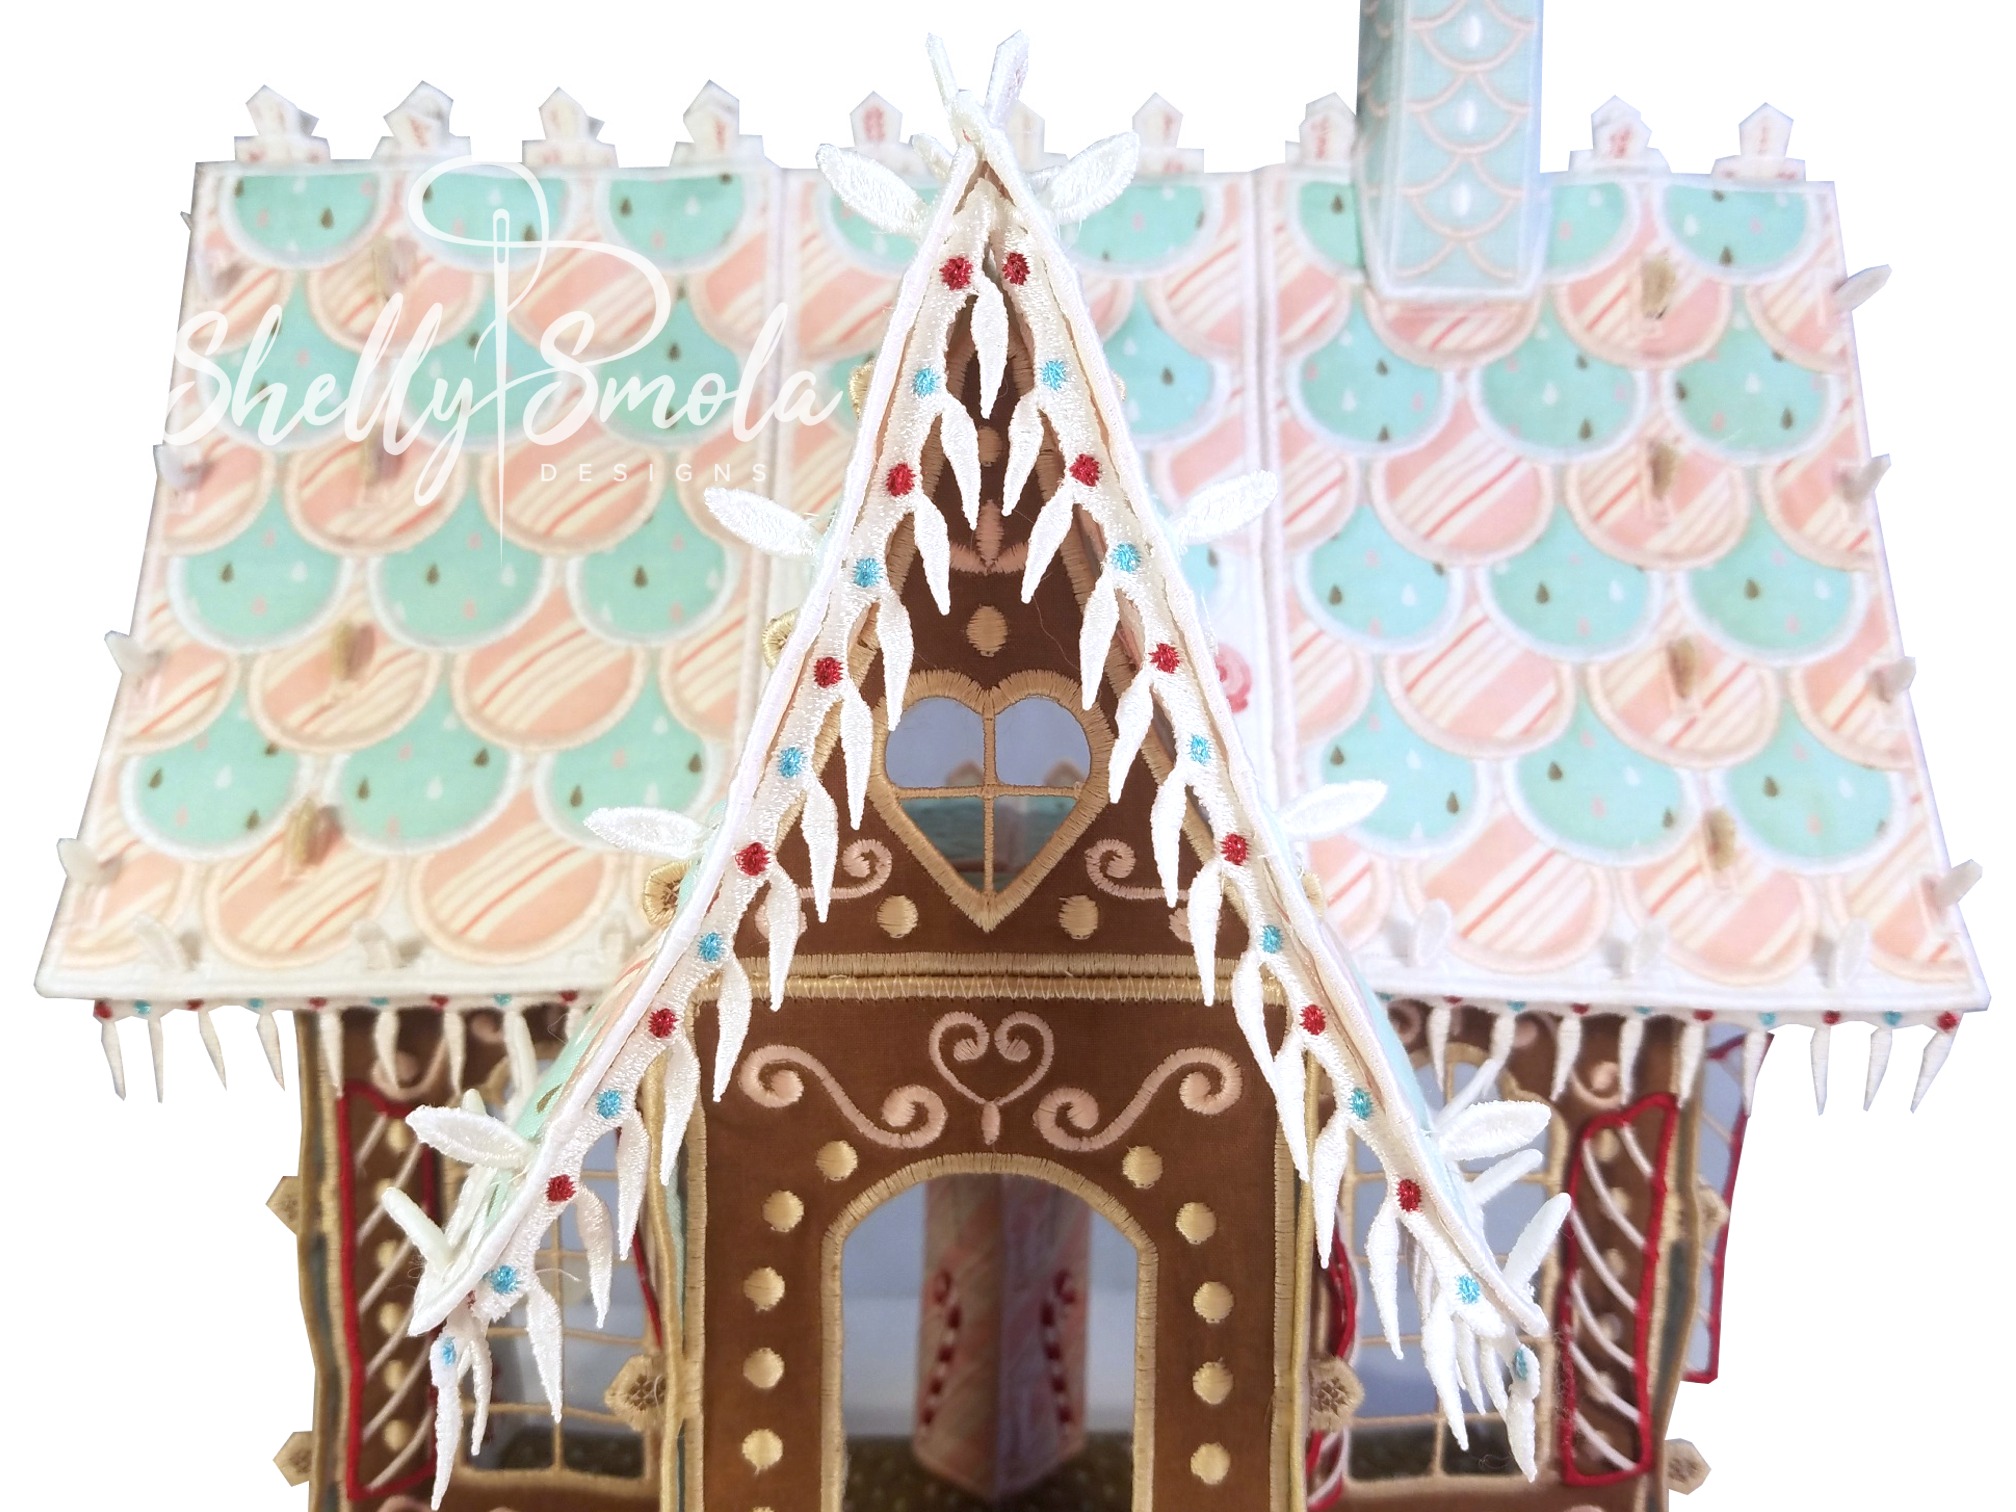 Candy Lane Cottage by Shelly Smola